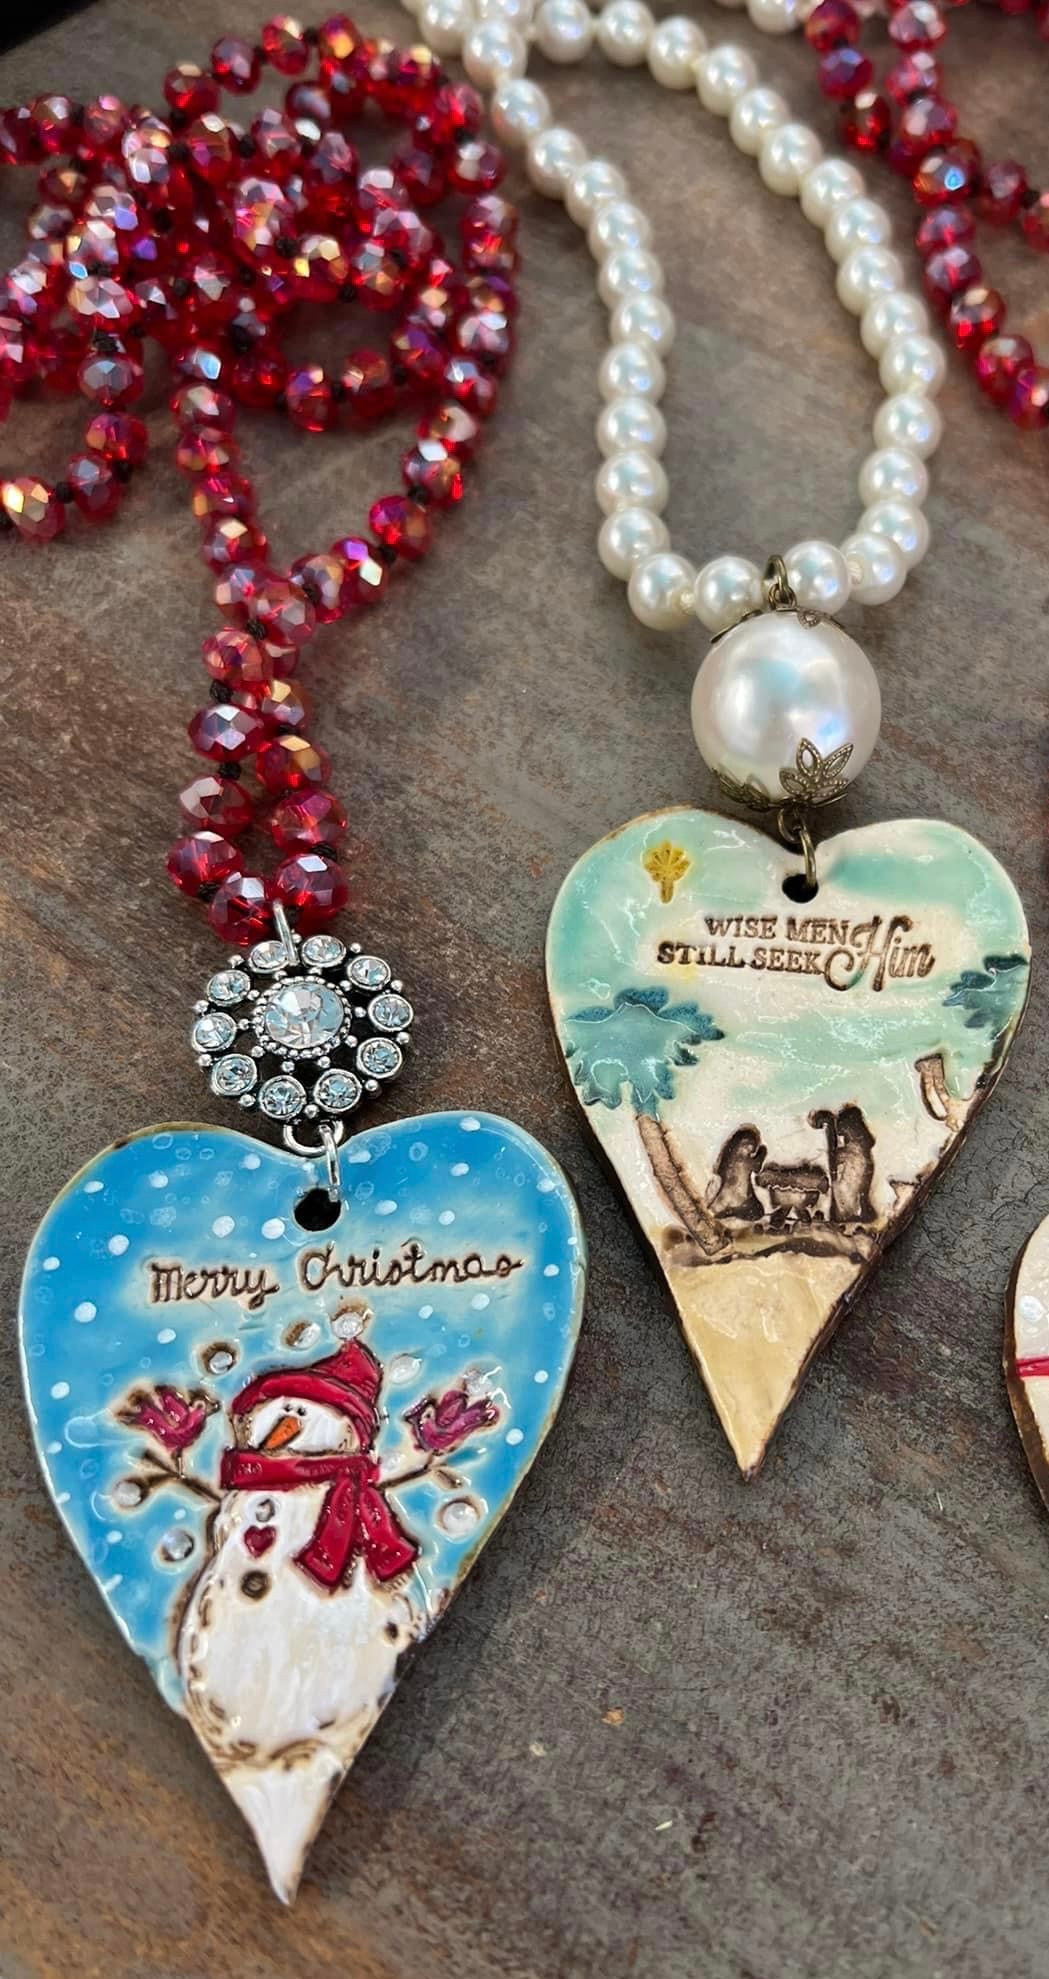 Christmas necklaces